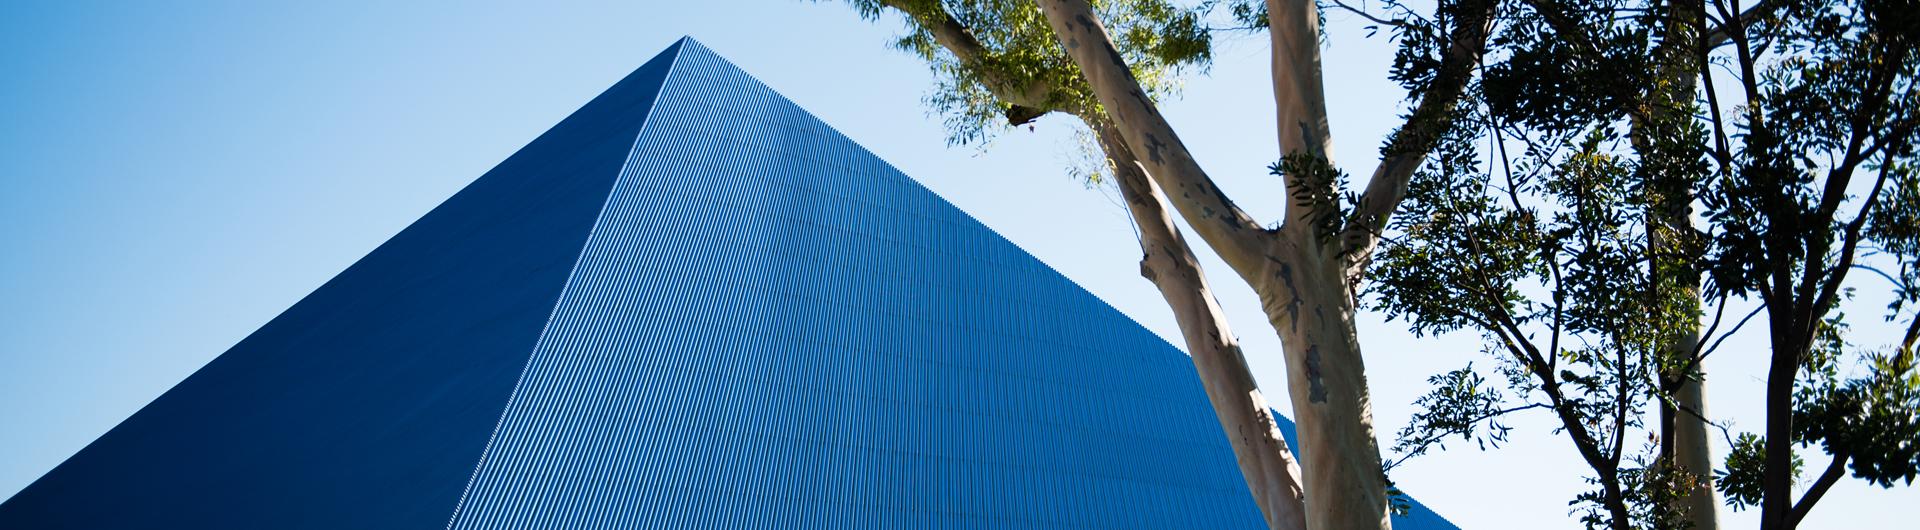 The blue CSULB Pyramid among campus trees